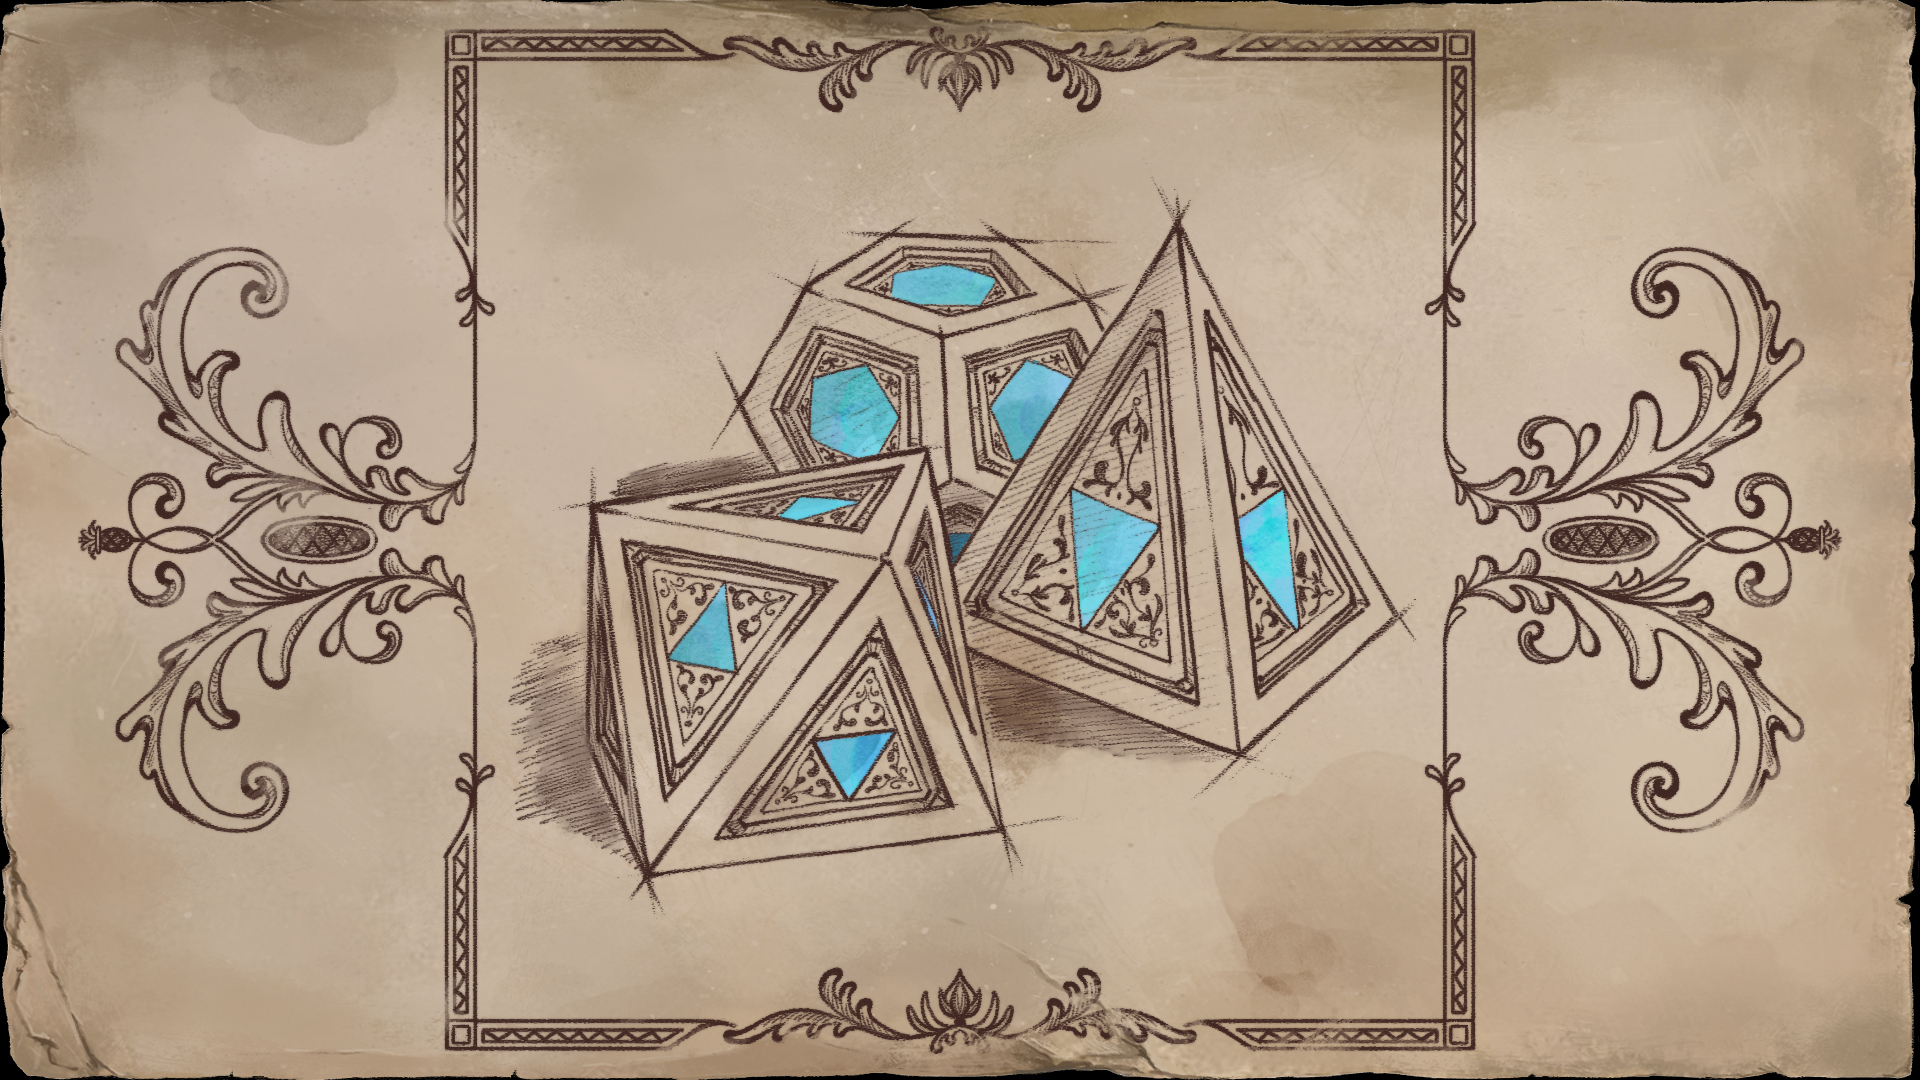 Icon for Workshop